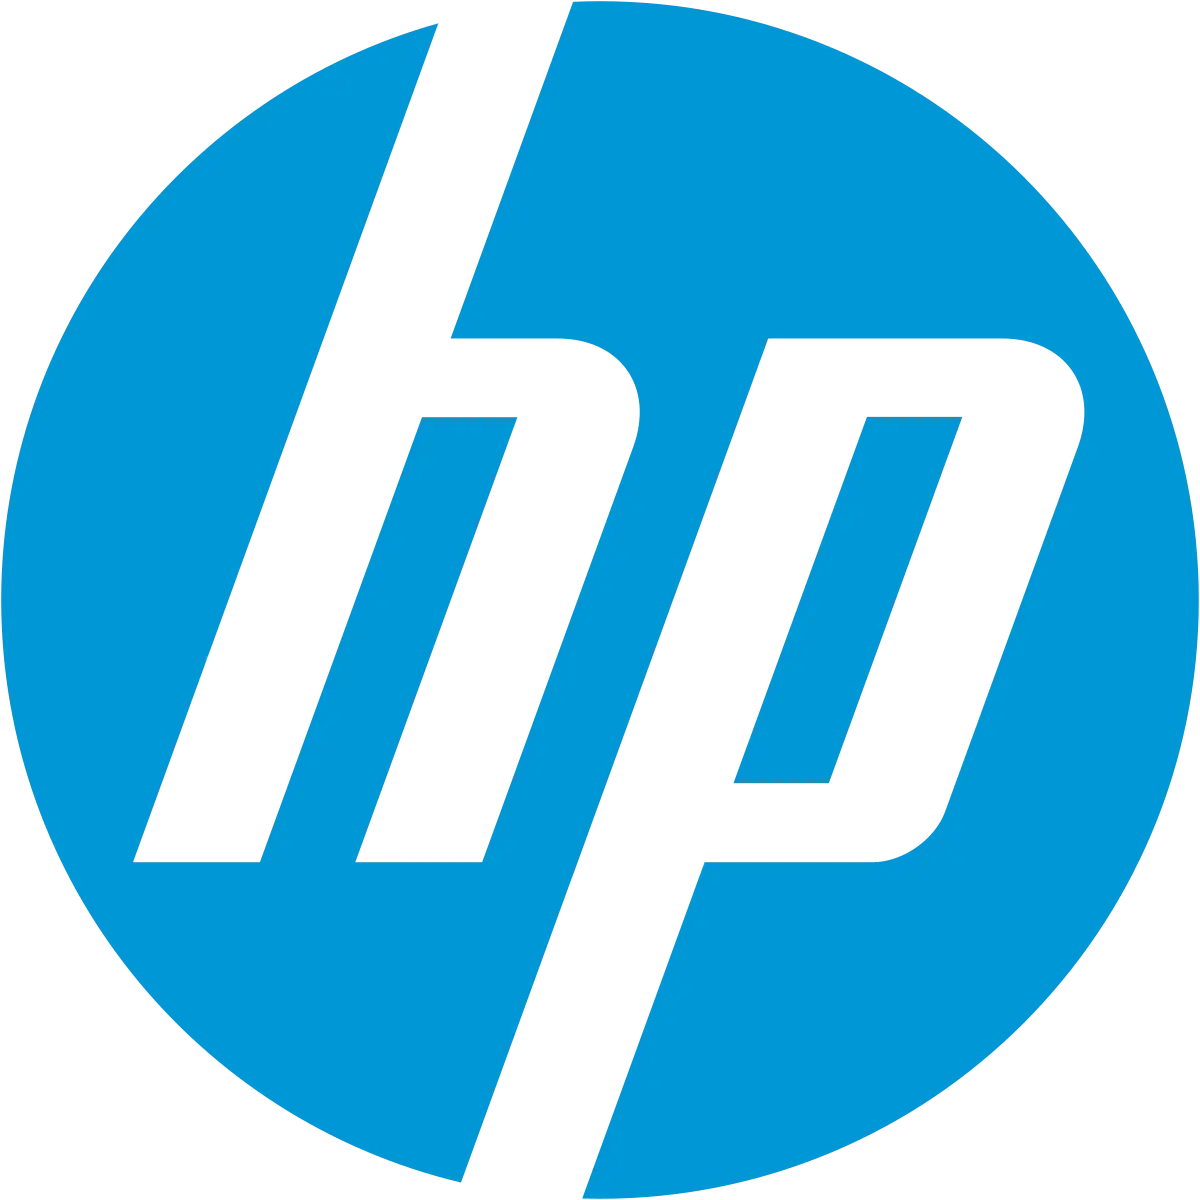 hewlett packard financial services - How does HP leasing work